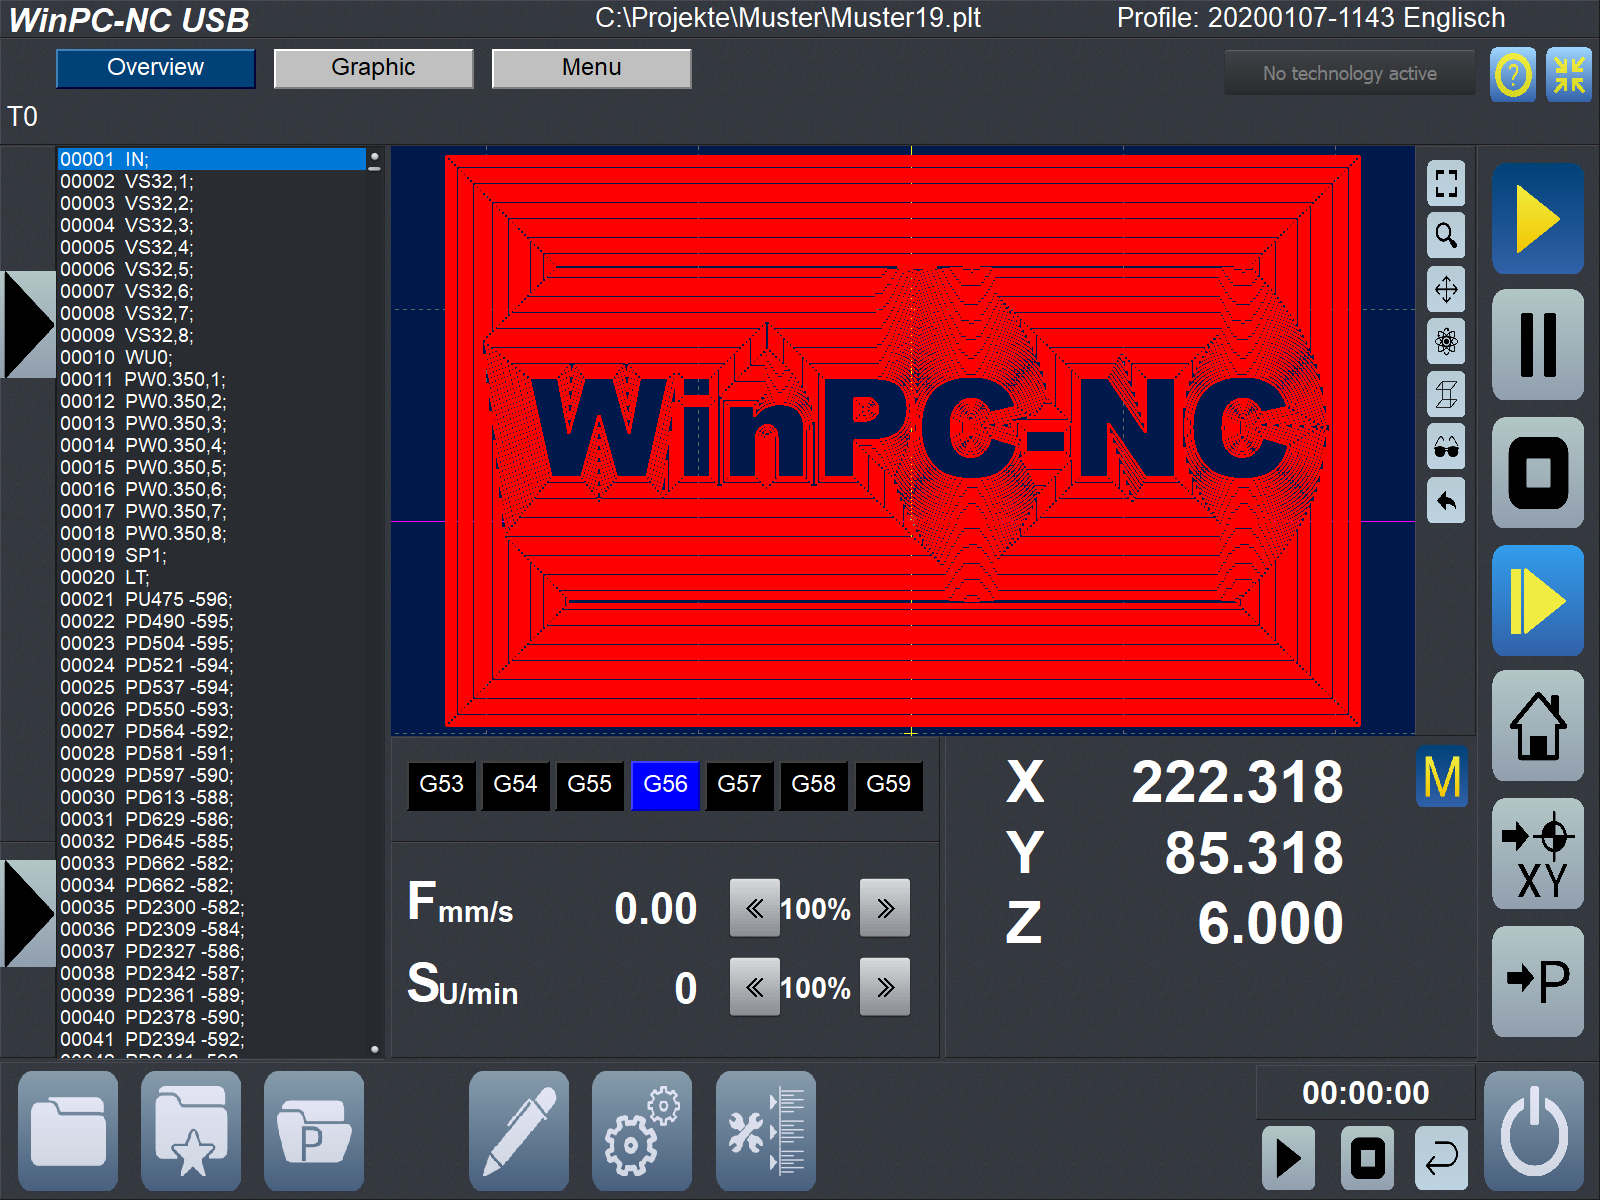 From WinPC-NC Light with nc100 to WinPC-NC USB with nc100